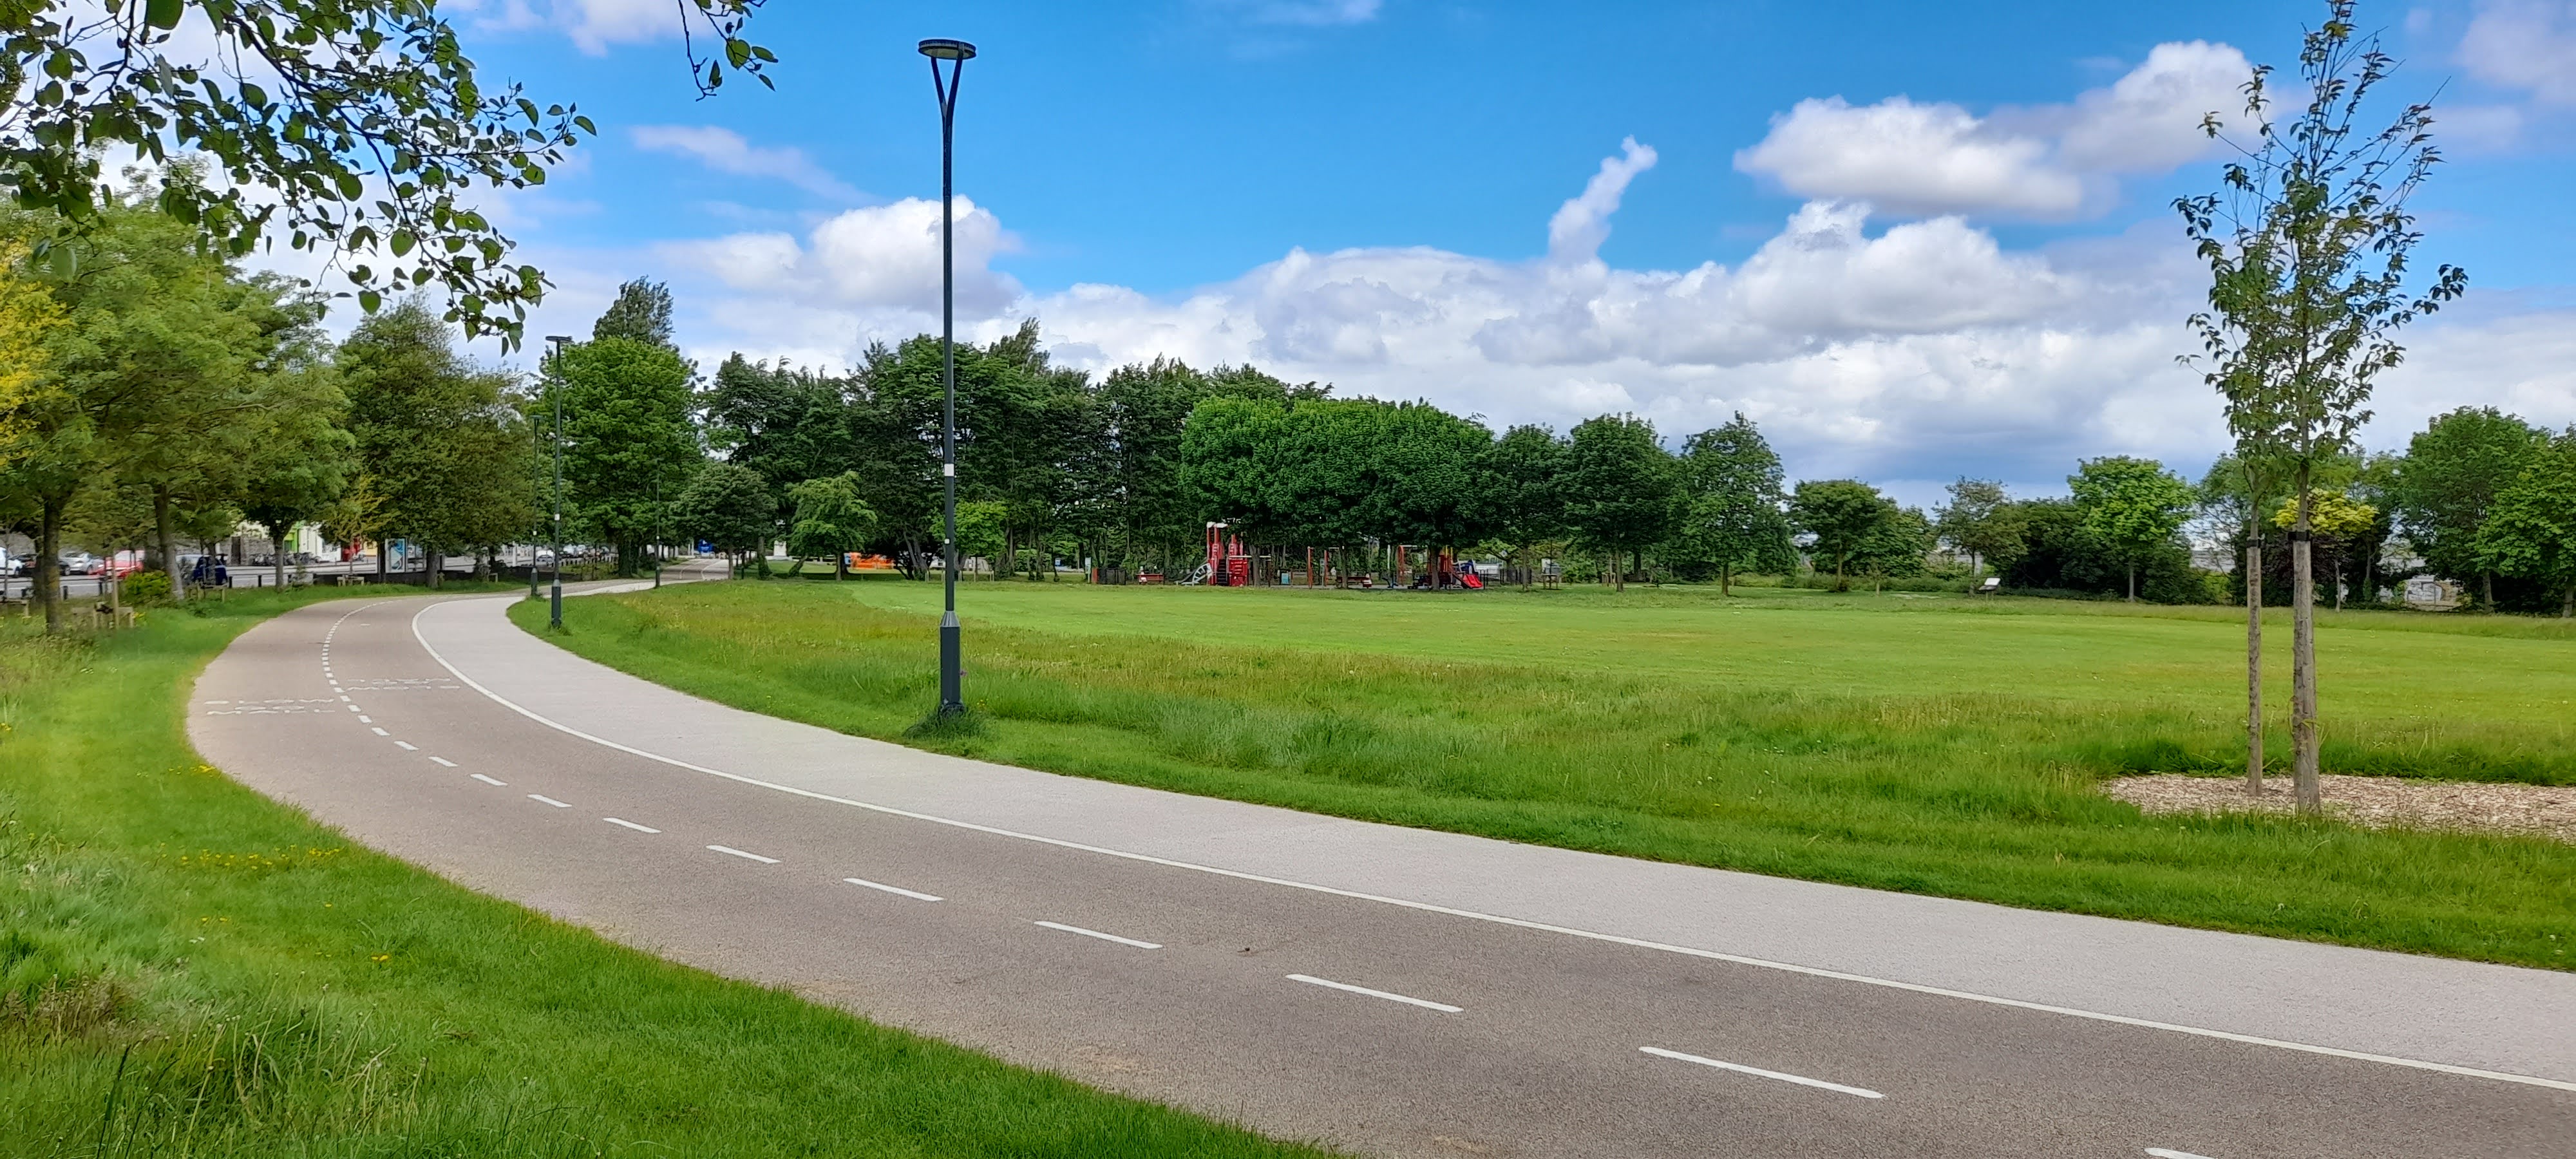 A curved, paved path bordered by grass and trees extends through a park under a blue sky with clouds. A playground with red equipment is visible in the distance.